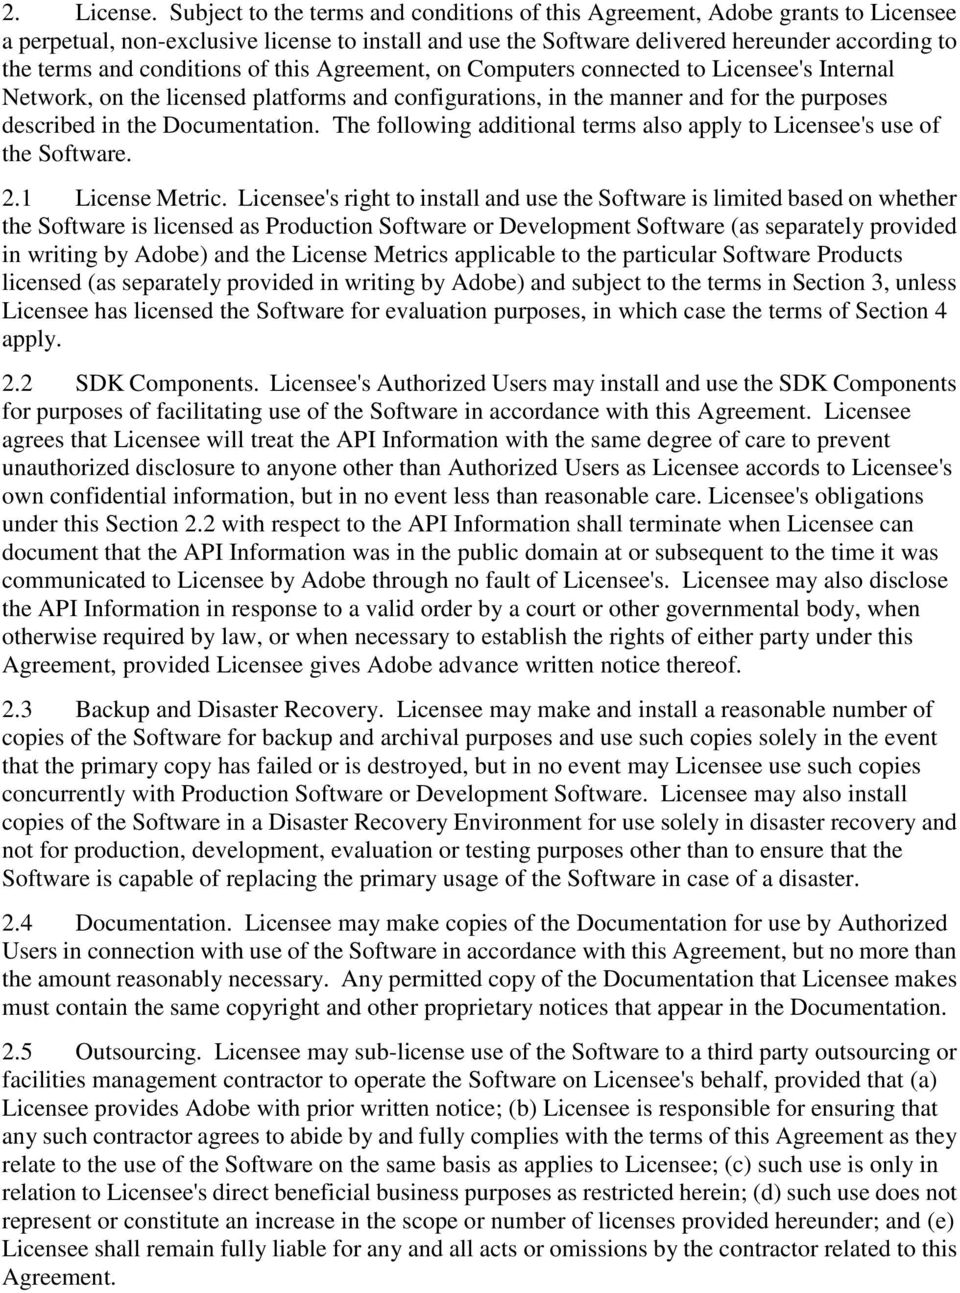 conditions of this Agreement, on Computers connected to Licensee's Internal Network, on the licensed platforms and configurations, in the manner and for the purposes described in the Documentation.